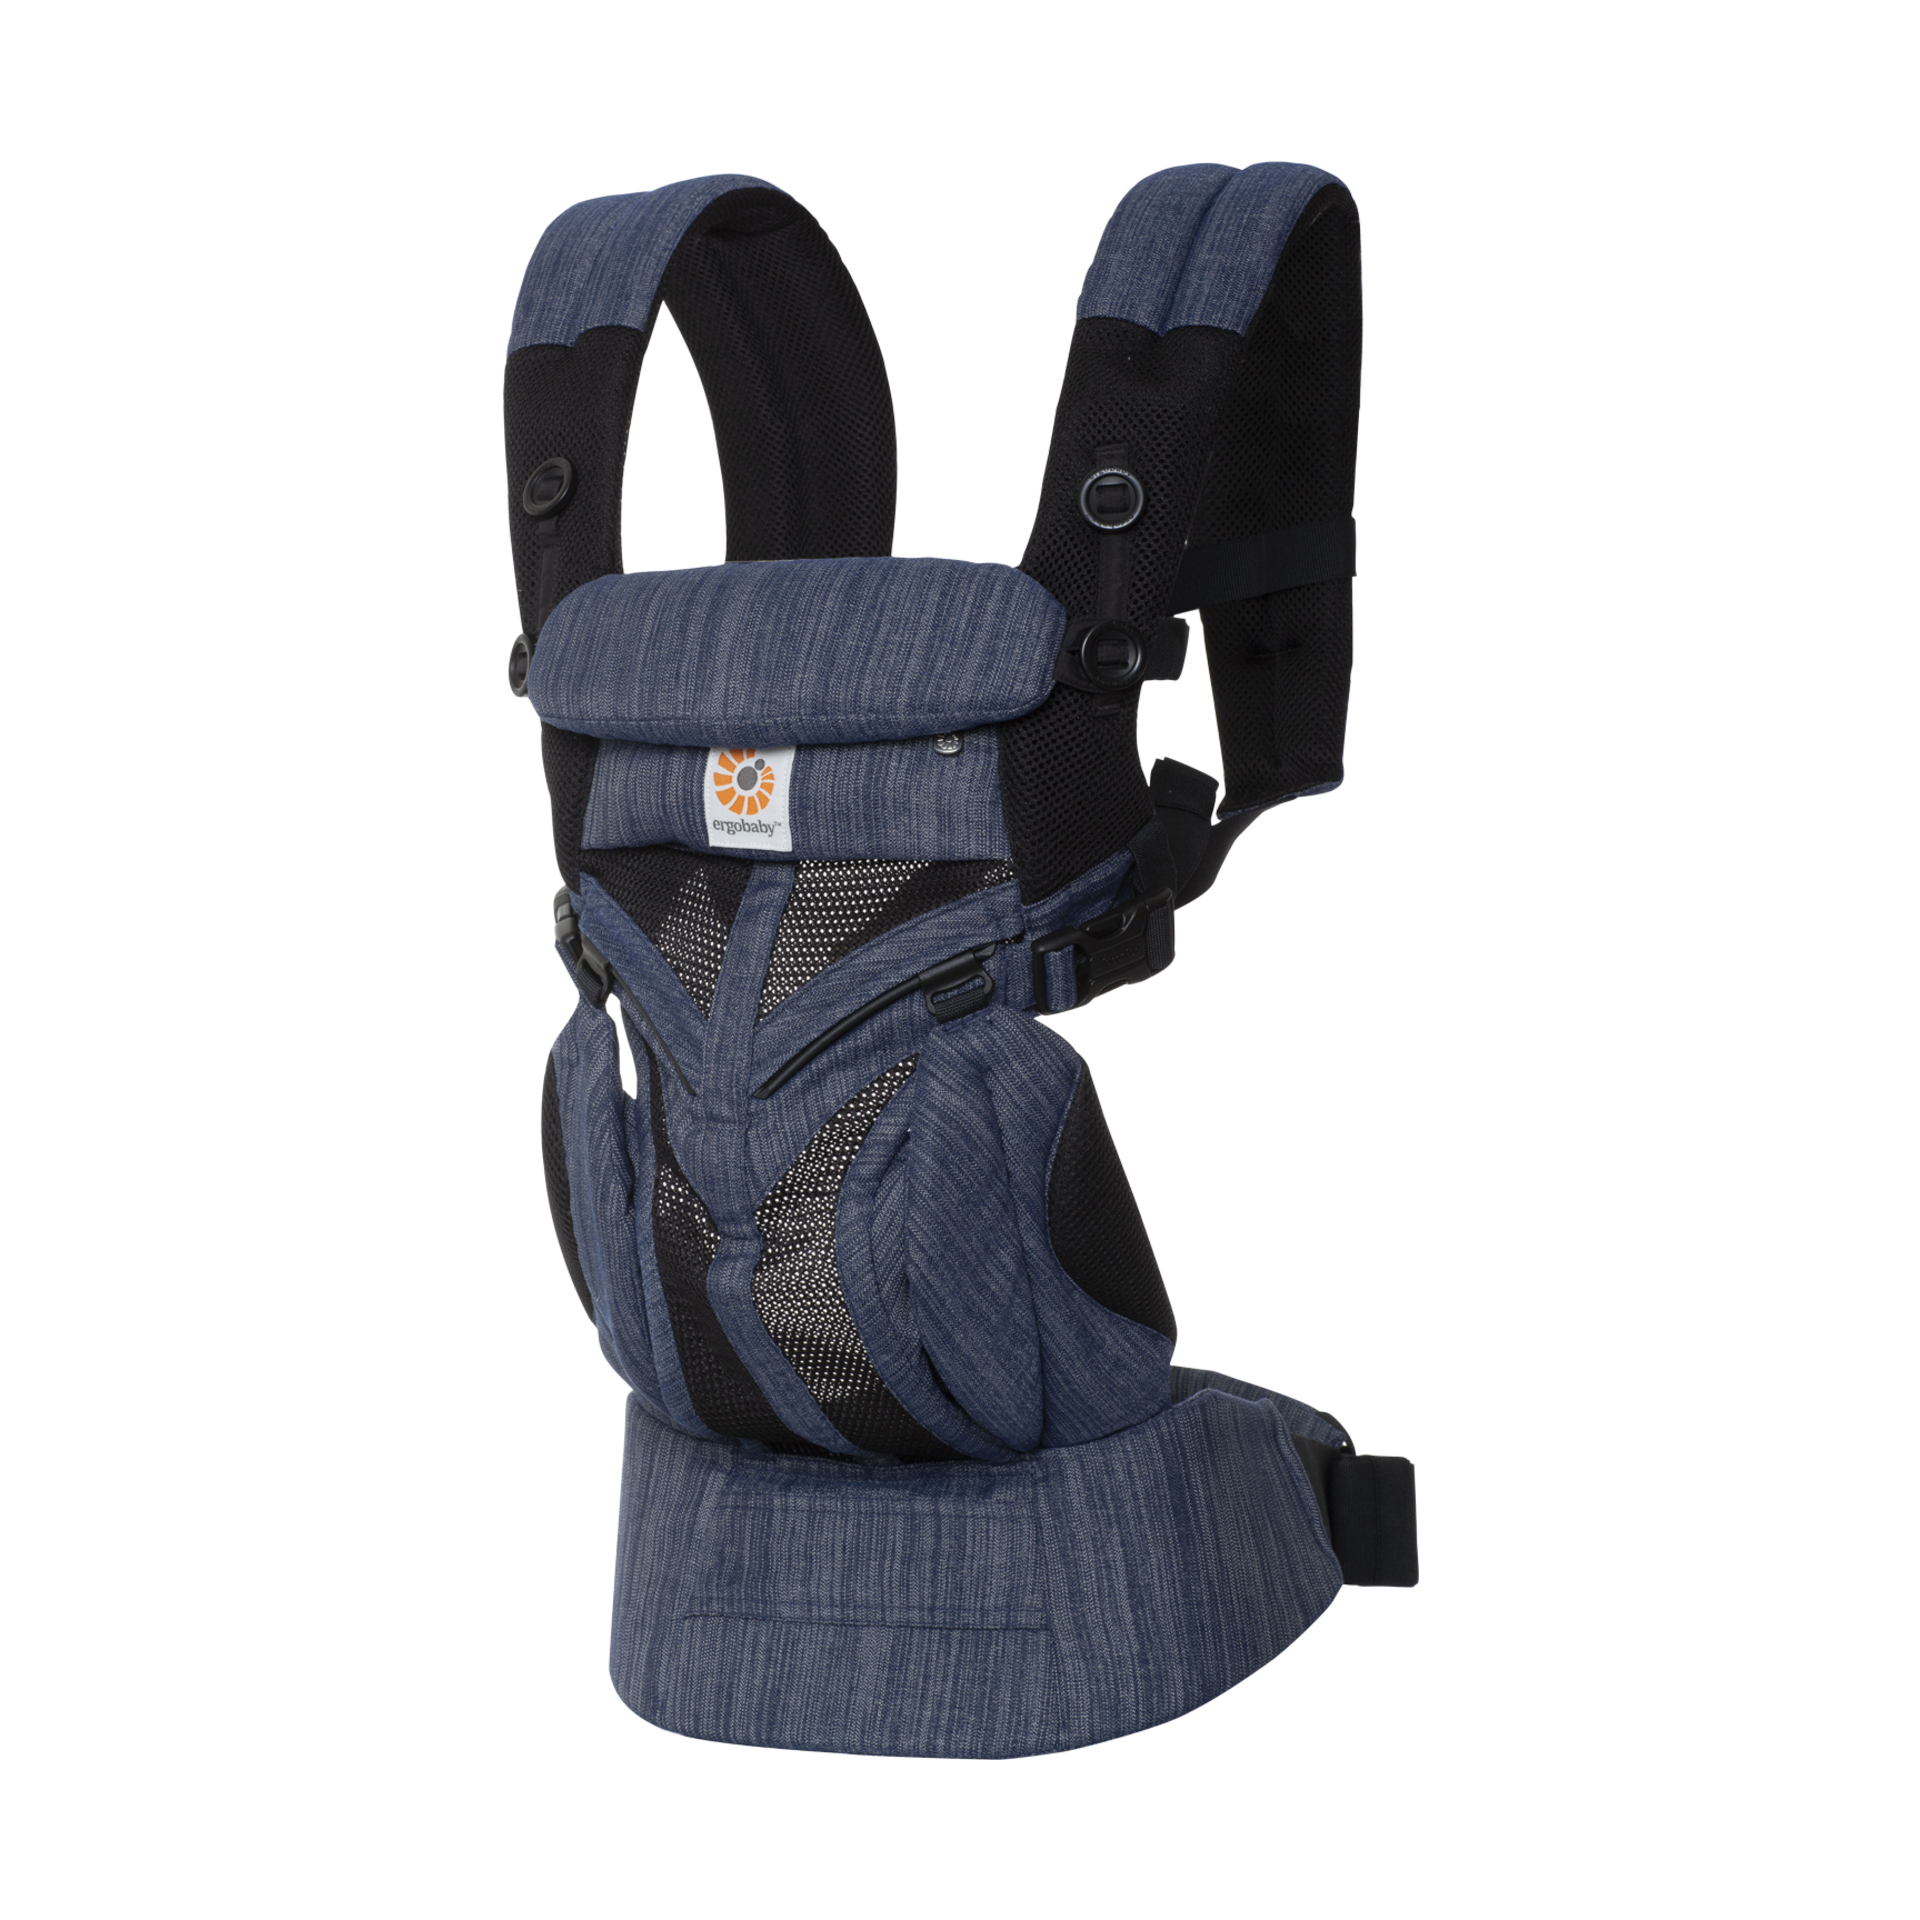 omni 360 baby carrier cool air mesh